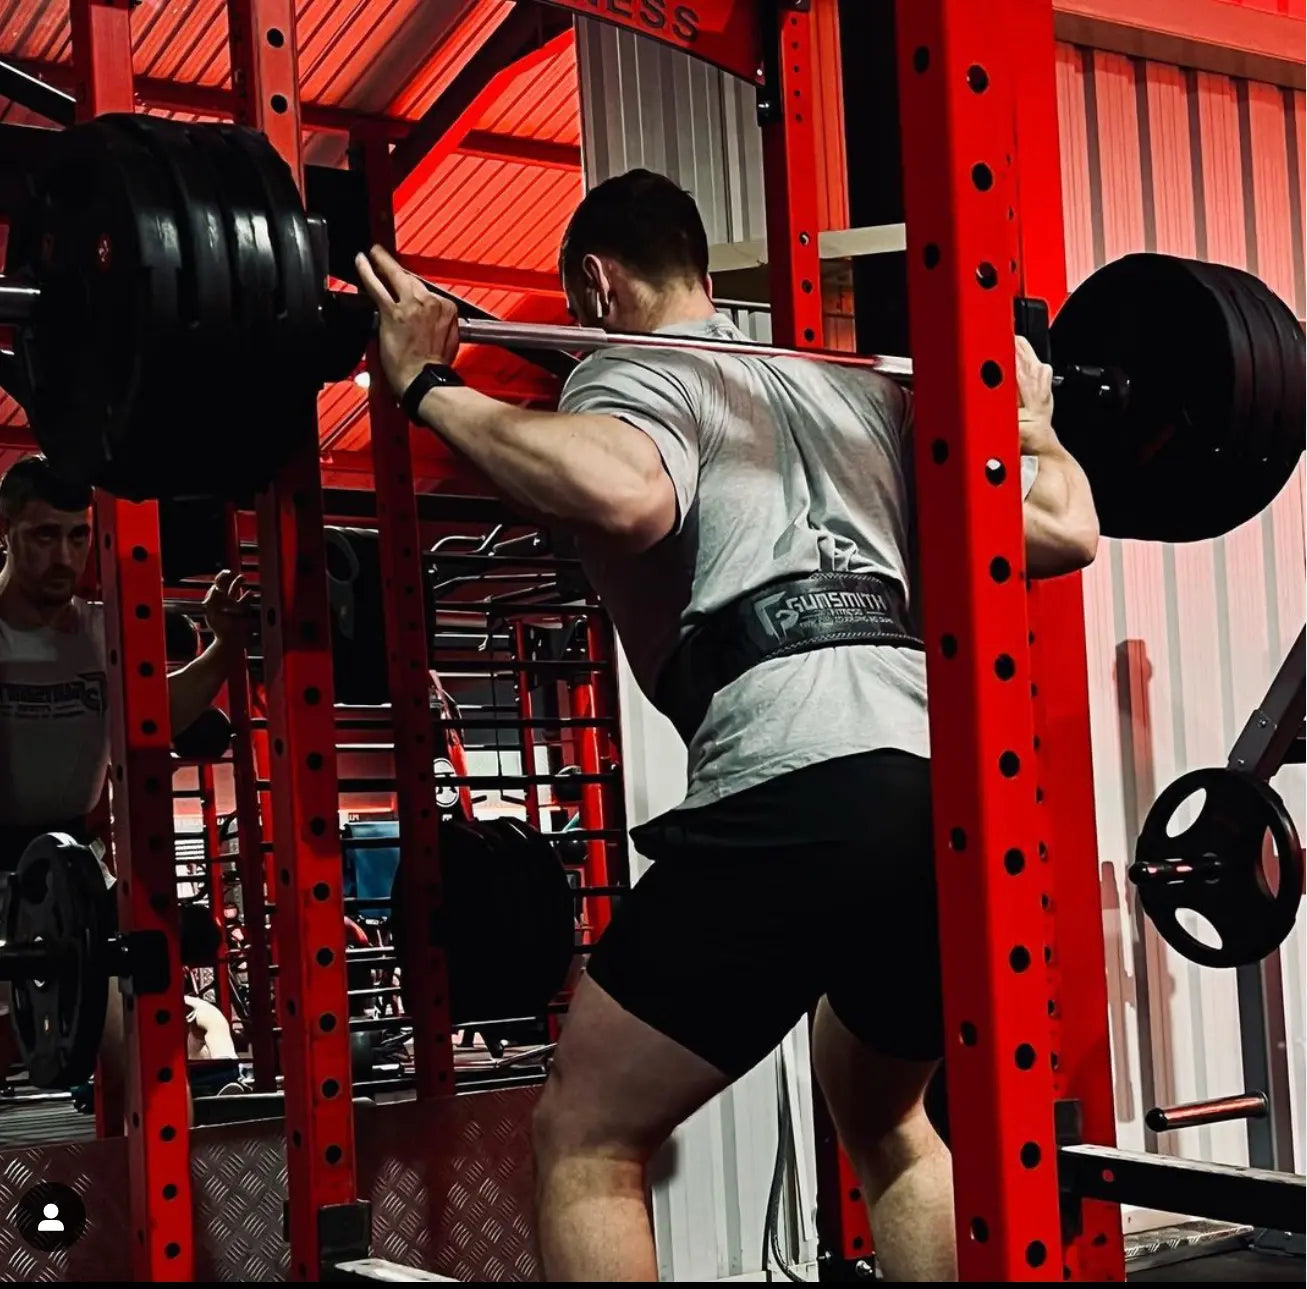 How Can I Improve My Squat Strength? - Gunsmith Fitness